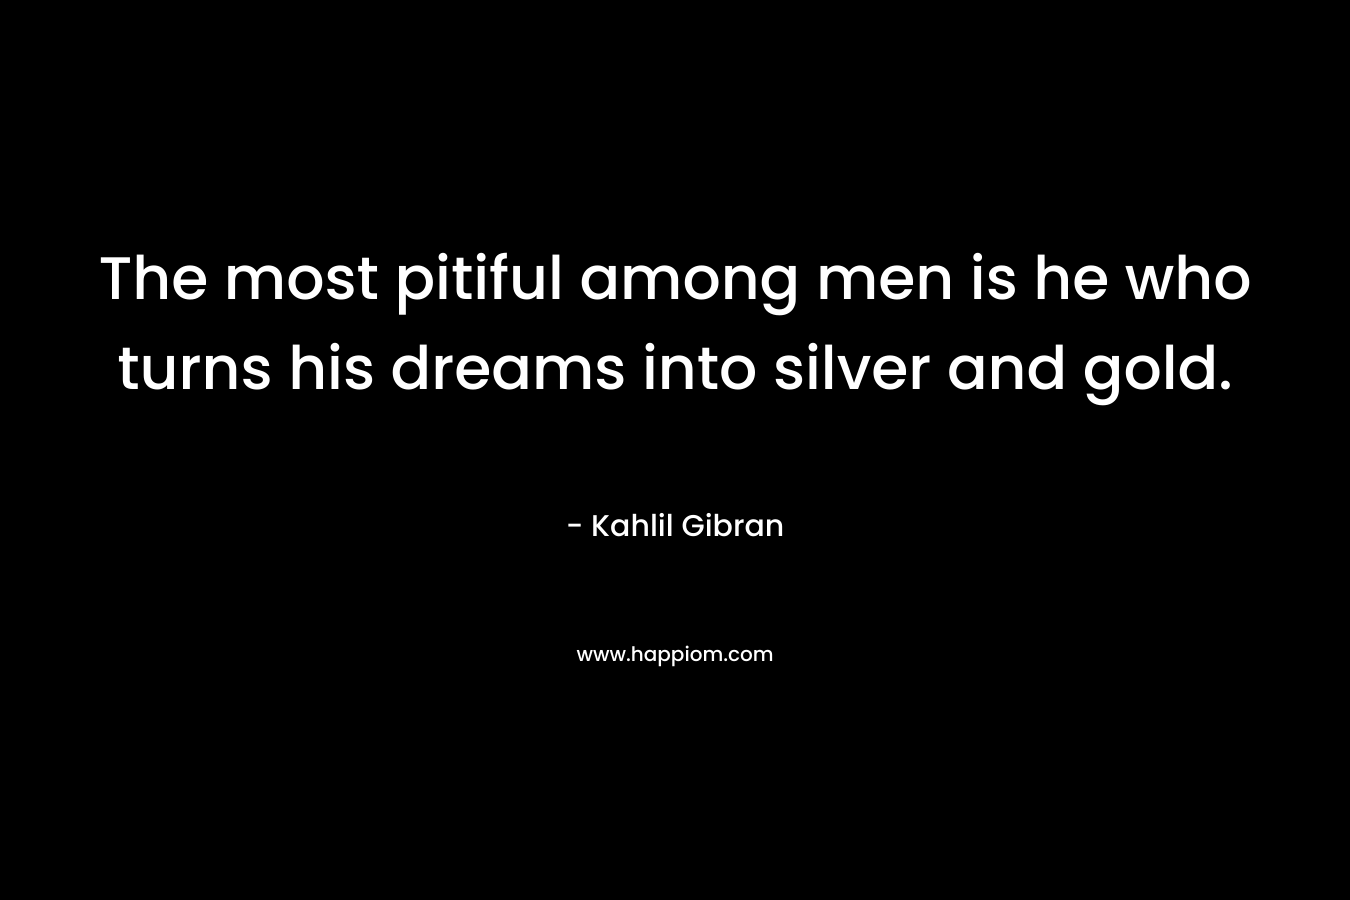 The most pitiful among men is he who turns his dreams into silver and gold. – Kahlil Gibran